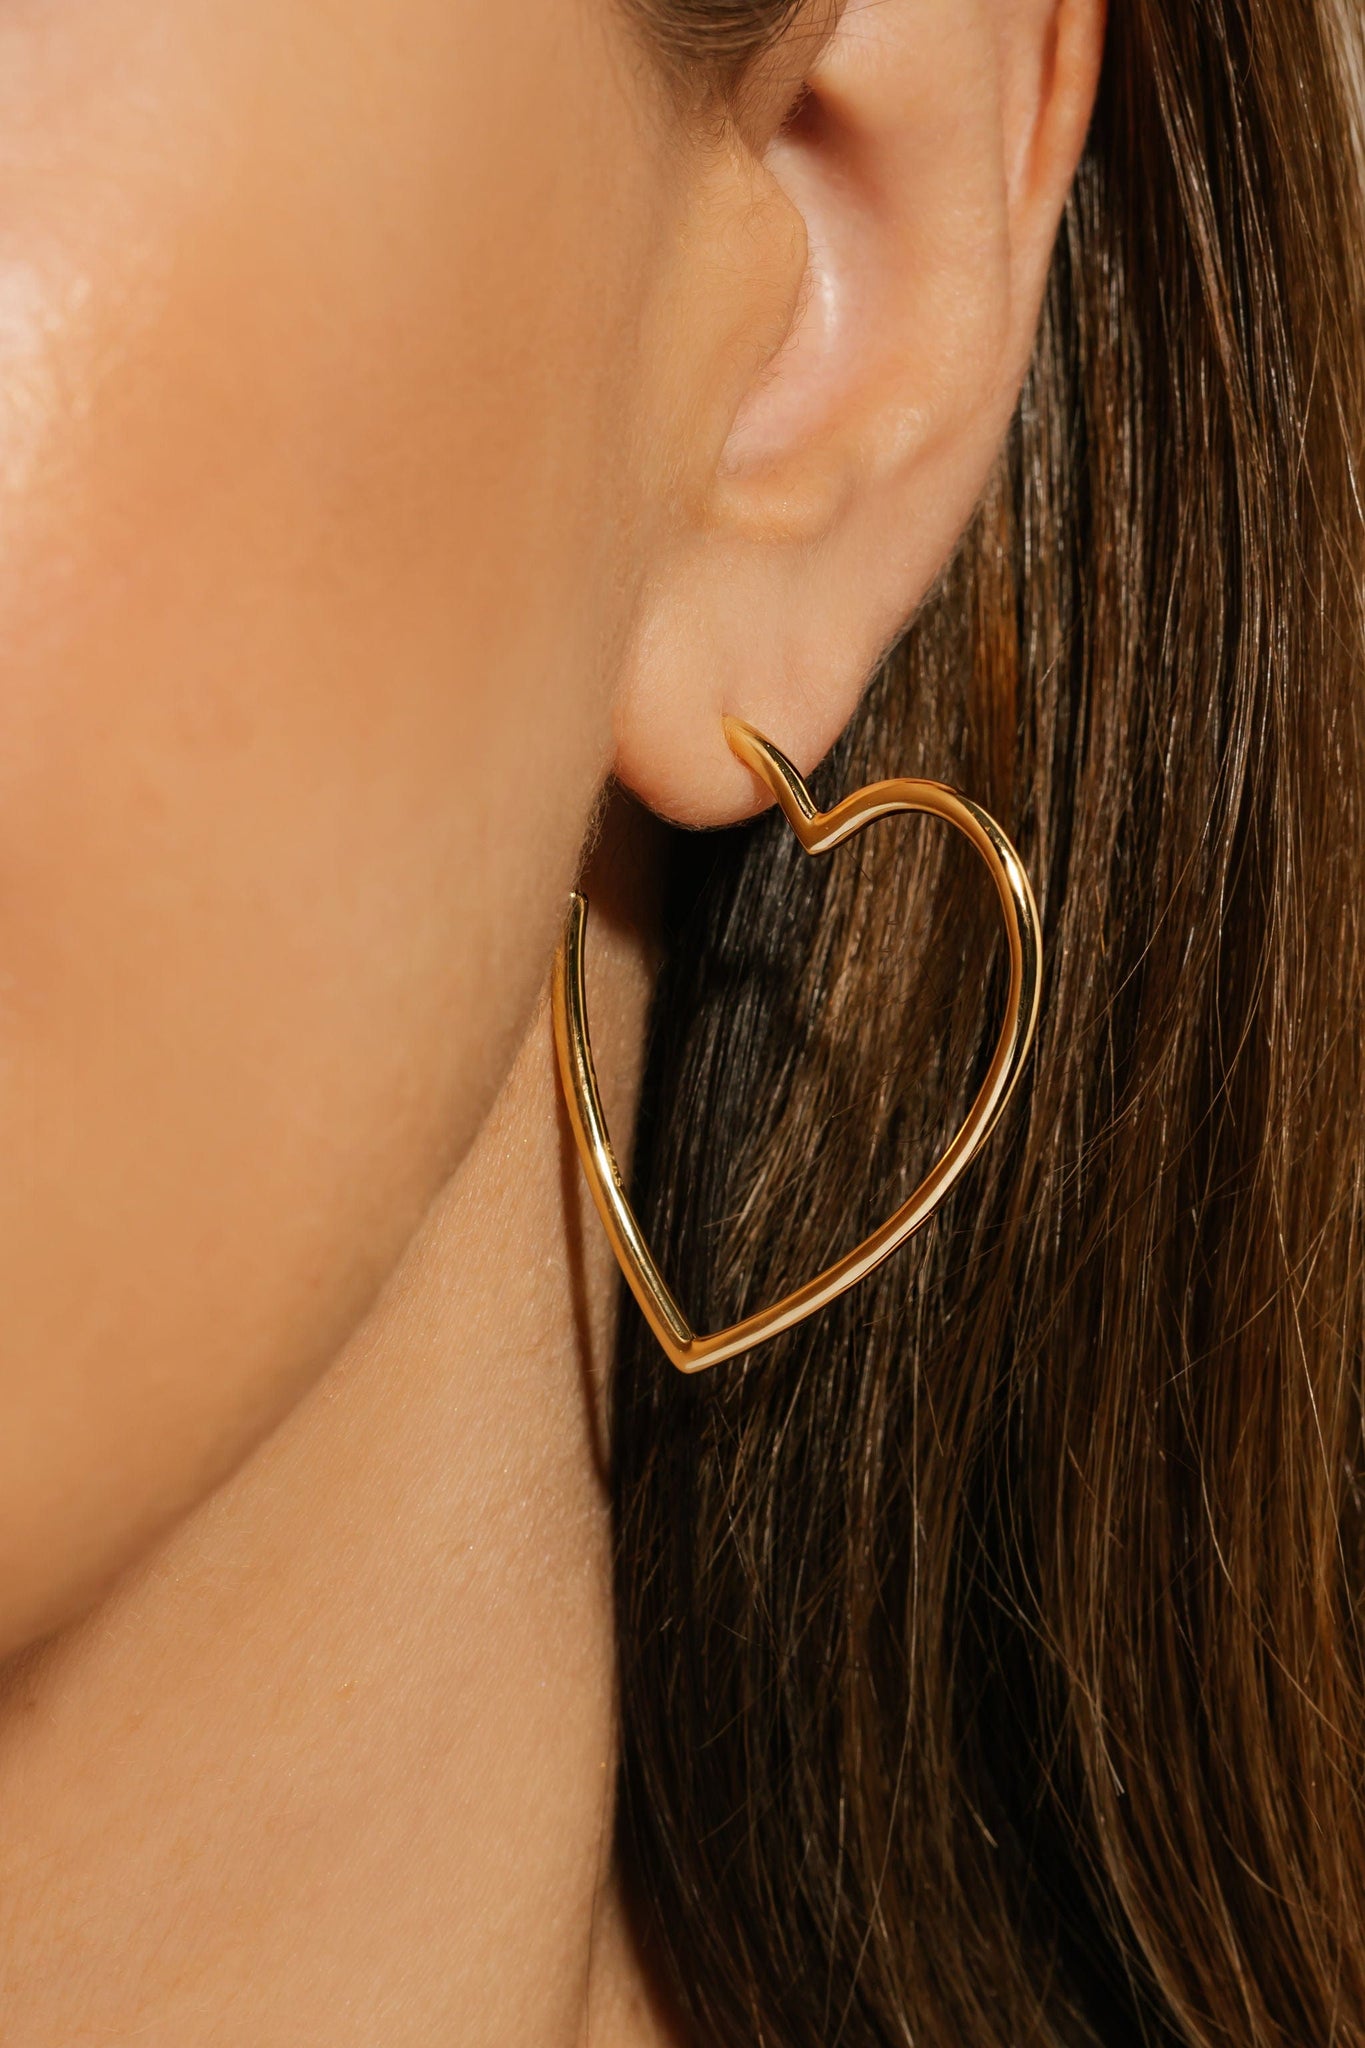 The open heart shape and golden shine of the Amore Hoop earring gracefully adorn the model's ear.